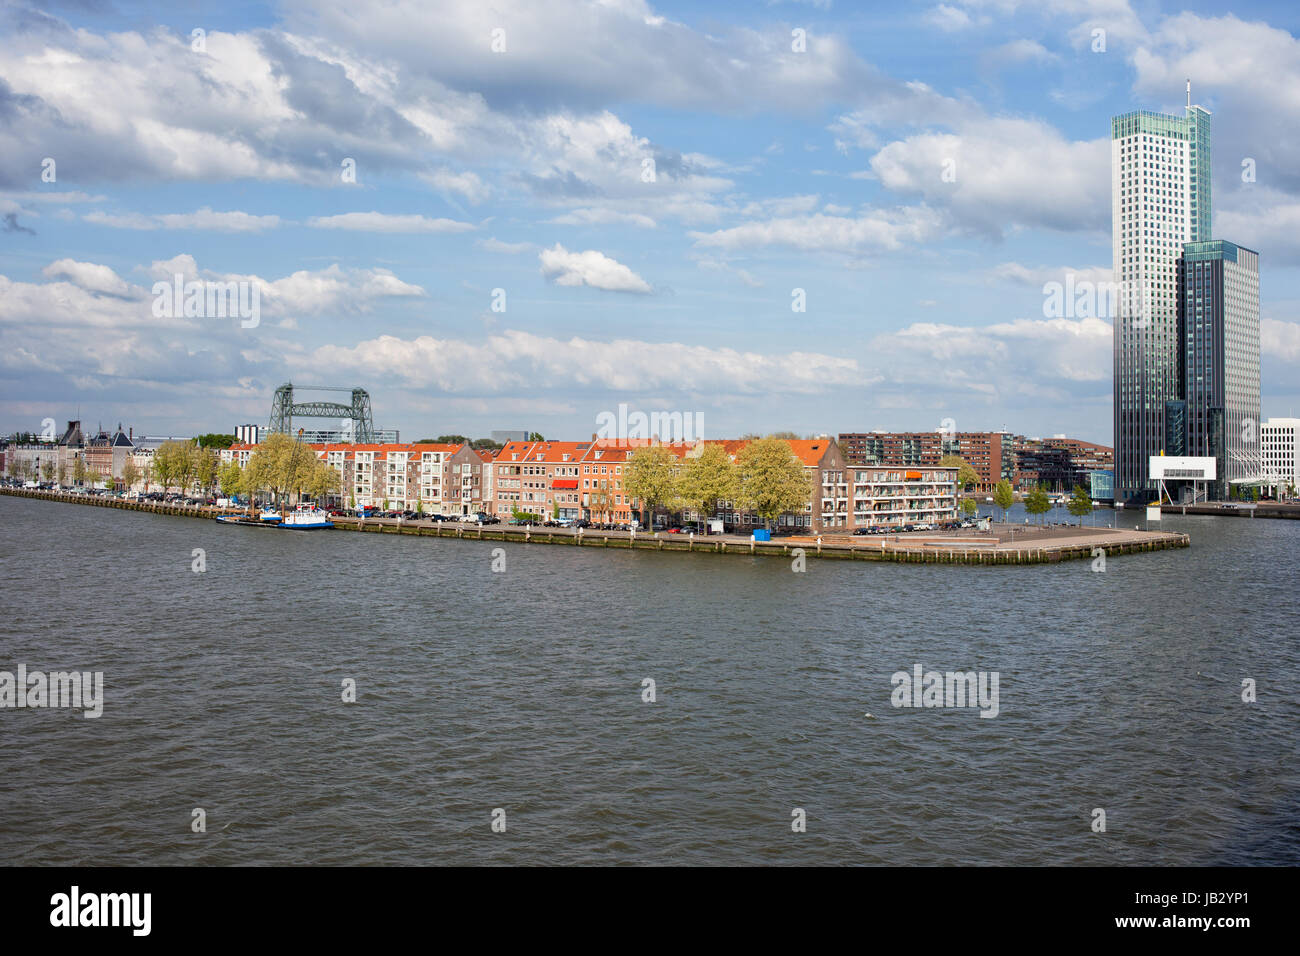 City of Rotterdam cityscape with apartment houses on a river island in South Holland, the Netherlands. Stock Photo